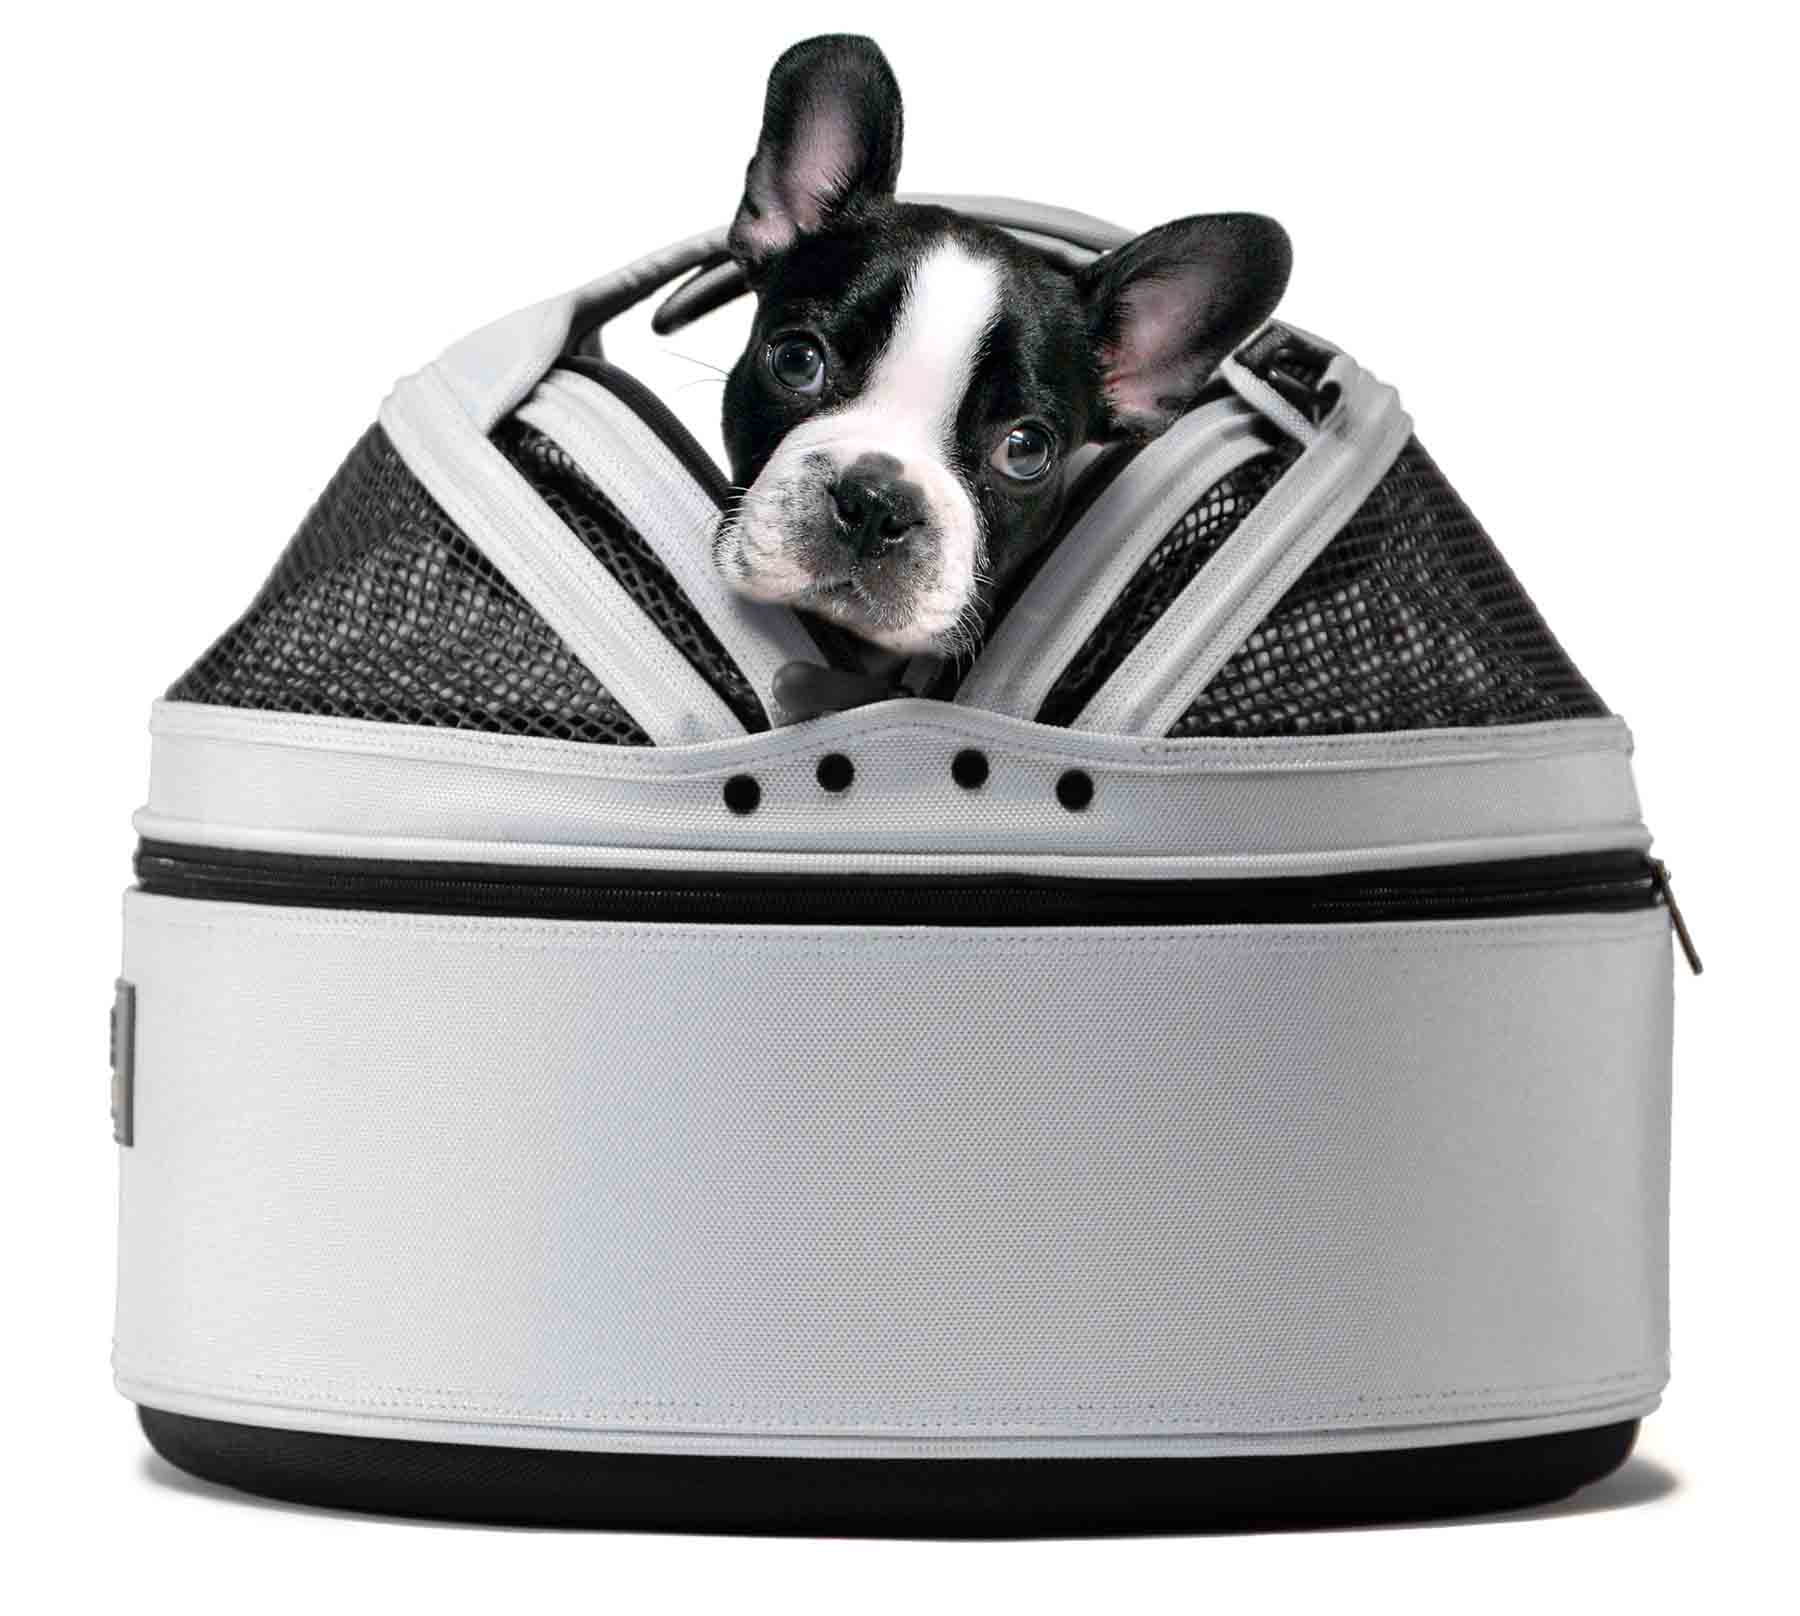 11 Of The Best Travel Carriers For Dogs